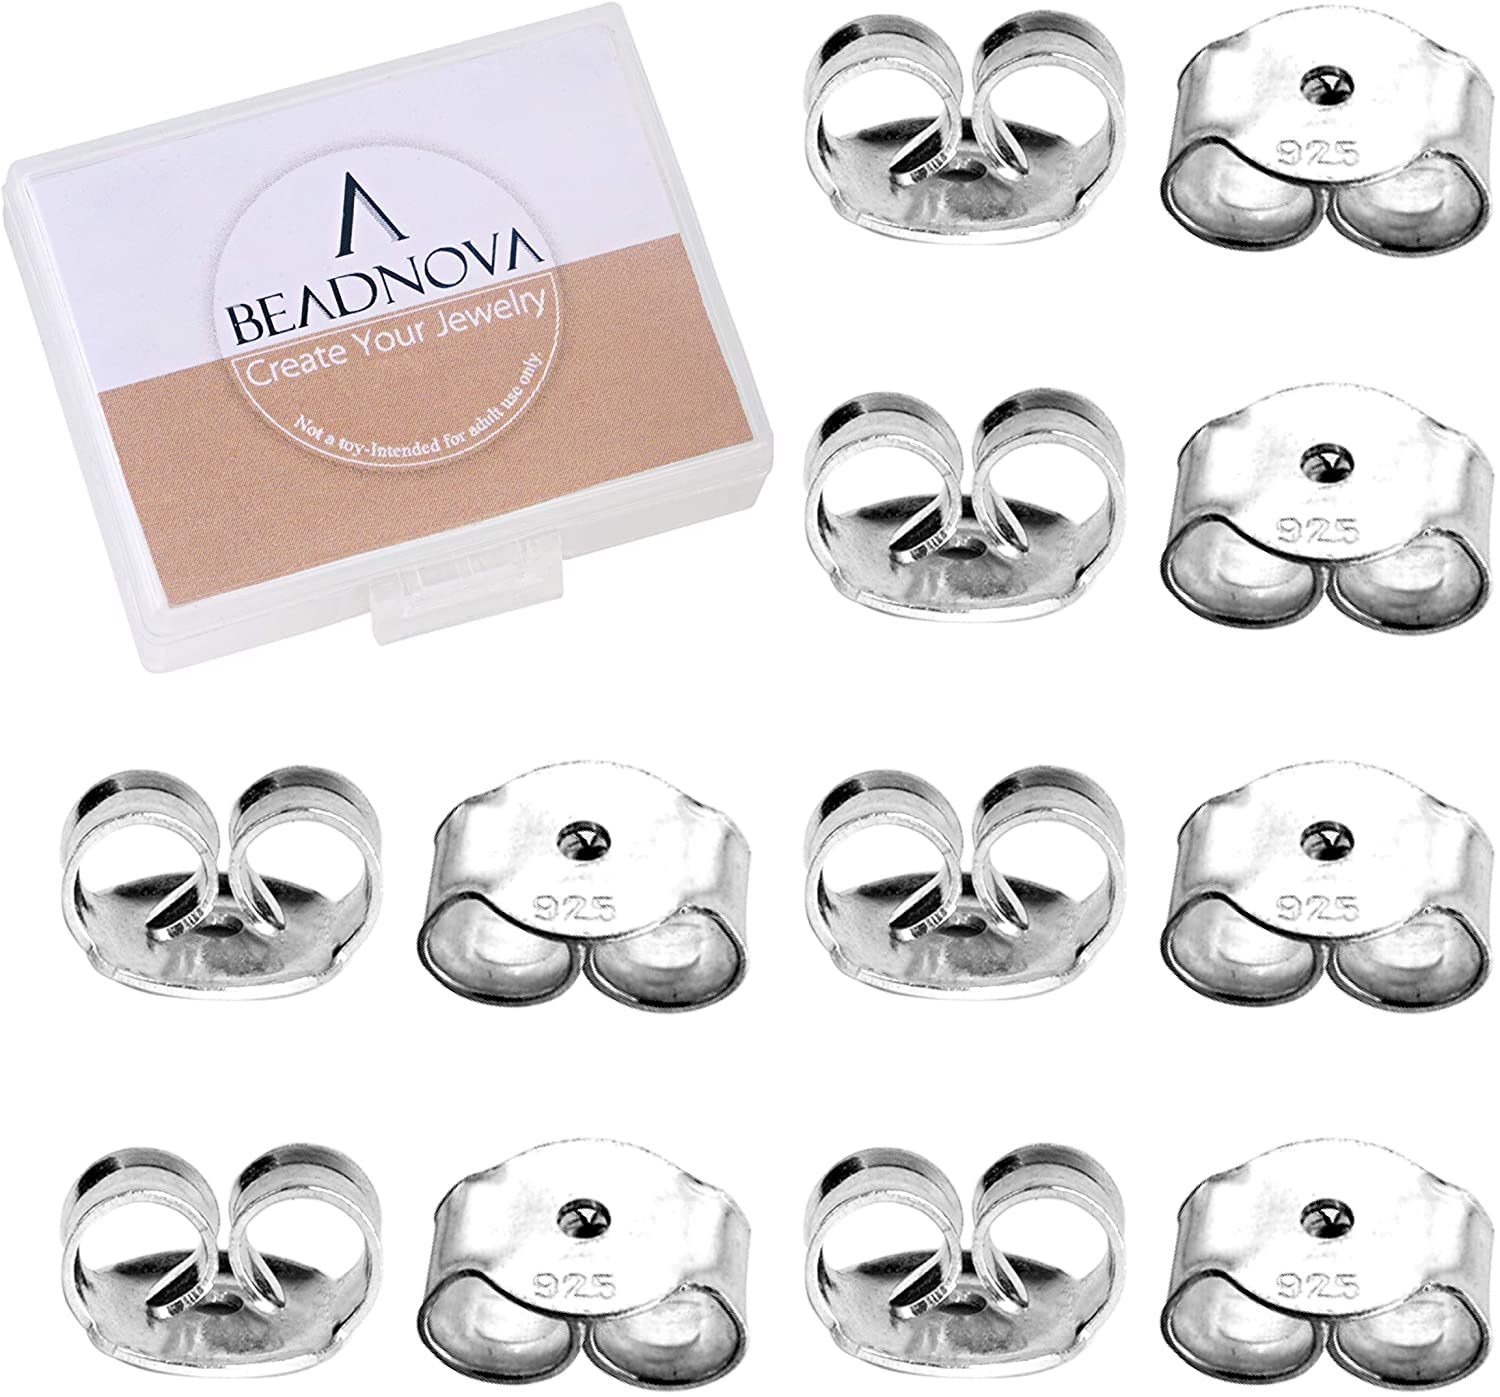 12Pcs/set Earring Backs Silicone Flat Earring Backs for Studs Post Clear  Silver Gold Comfort Earring Backs for Earring